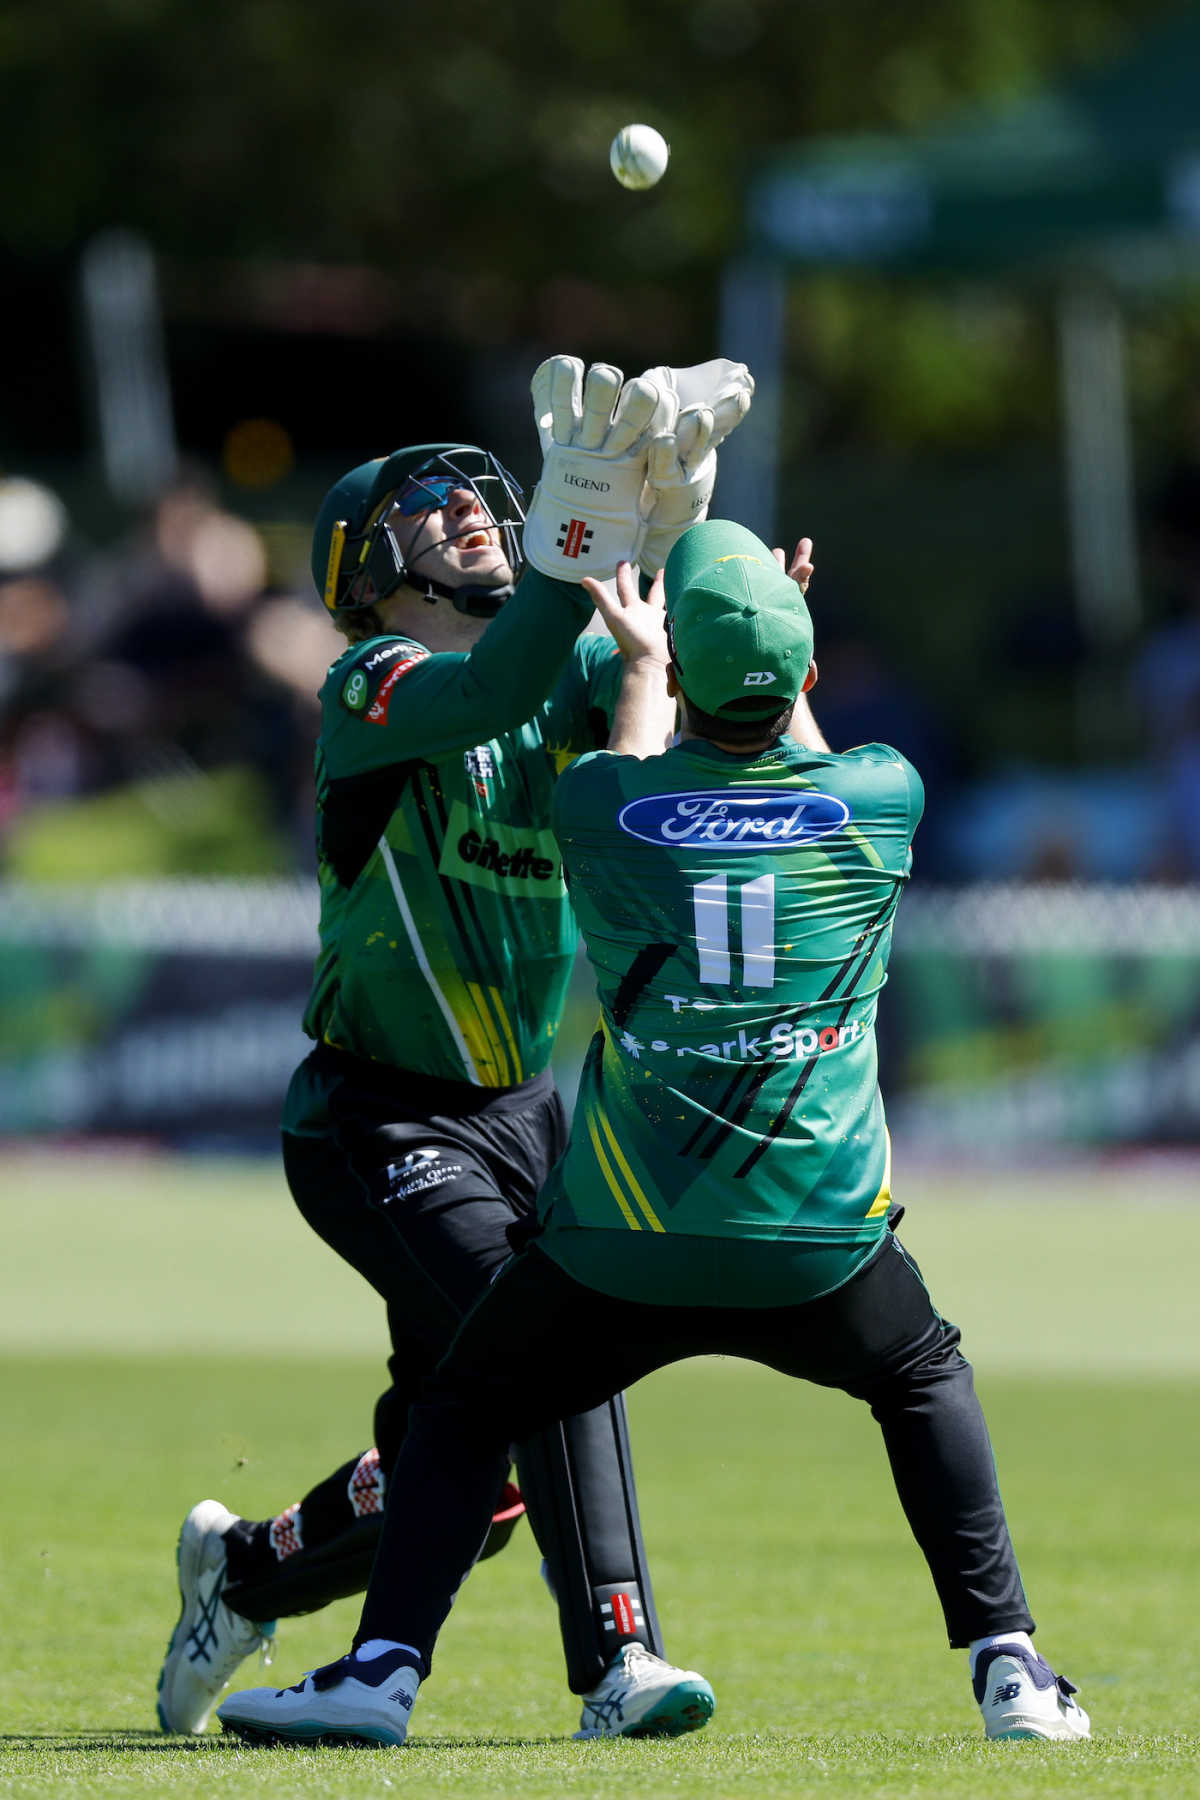 Dan Cleaver and Ray Toole almost collide while attempting a catch, Central Districts vs Wellington, Super Smash 2022-23, Palmerston North, December 27, 2022